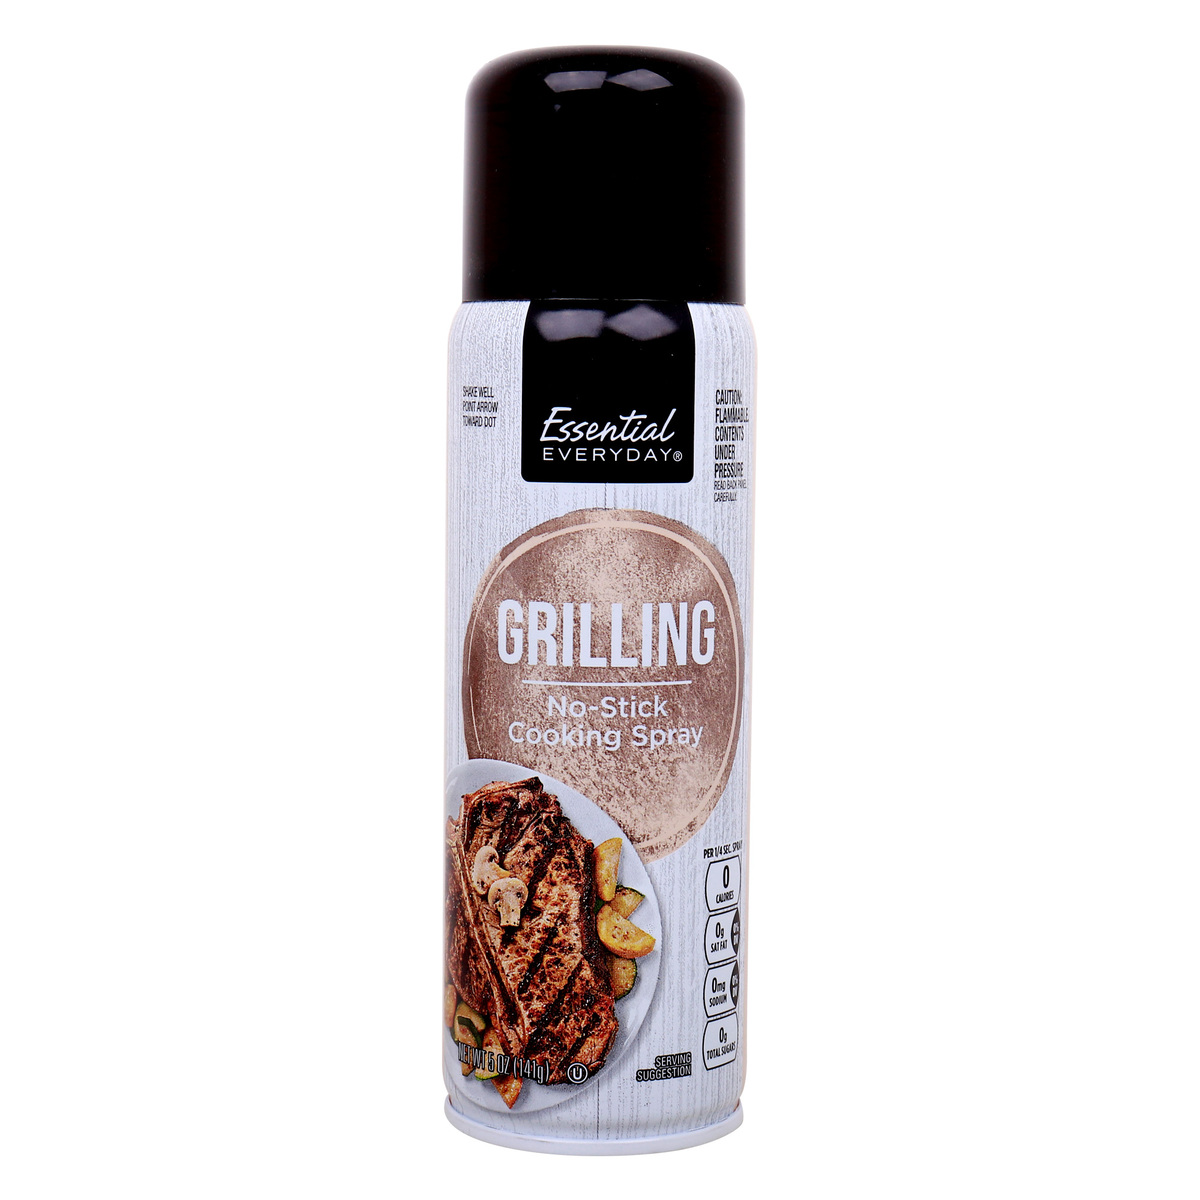 Essential Everyday Grilling Cooking Spray 141 g